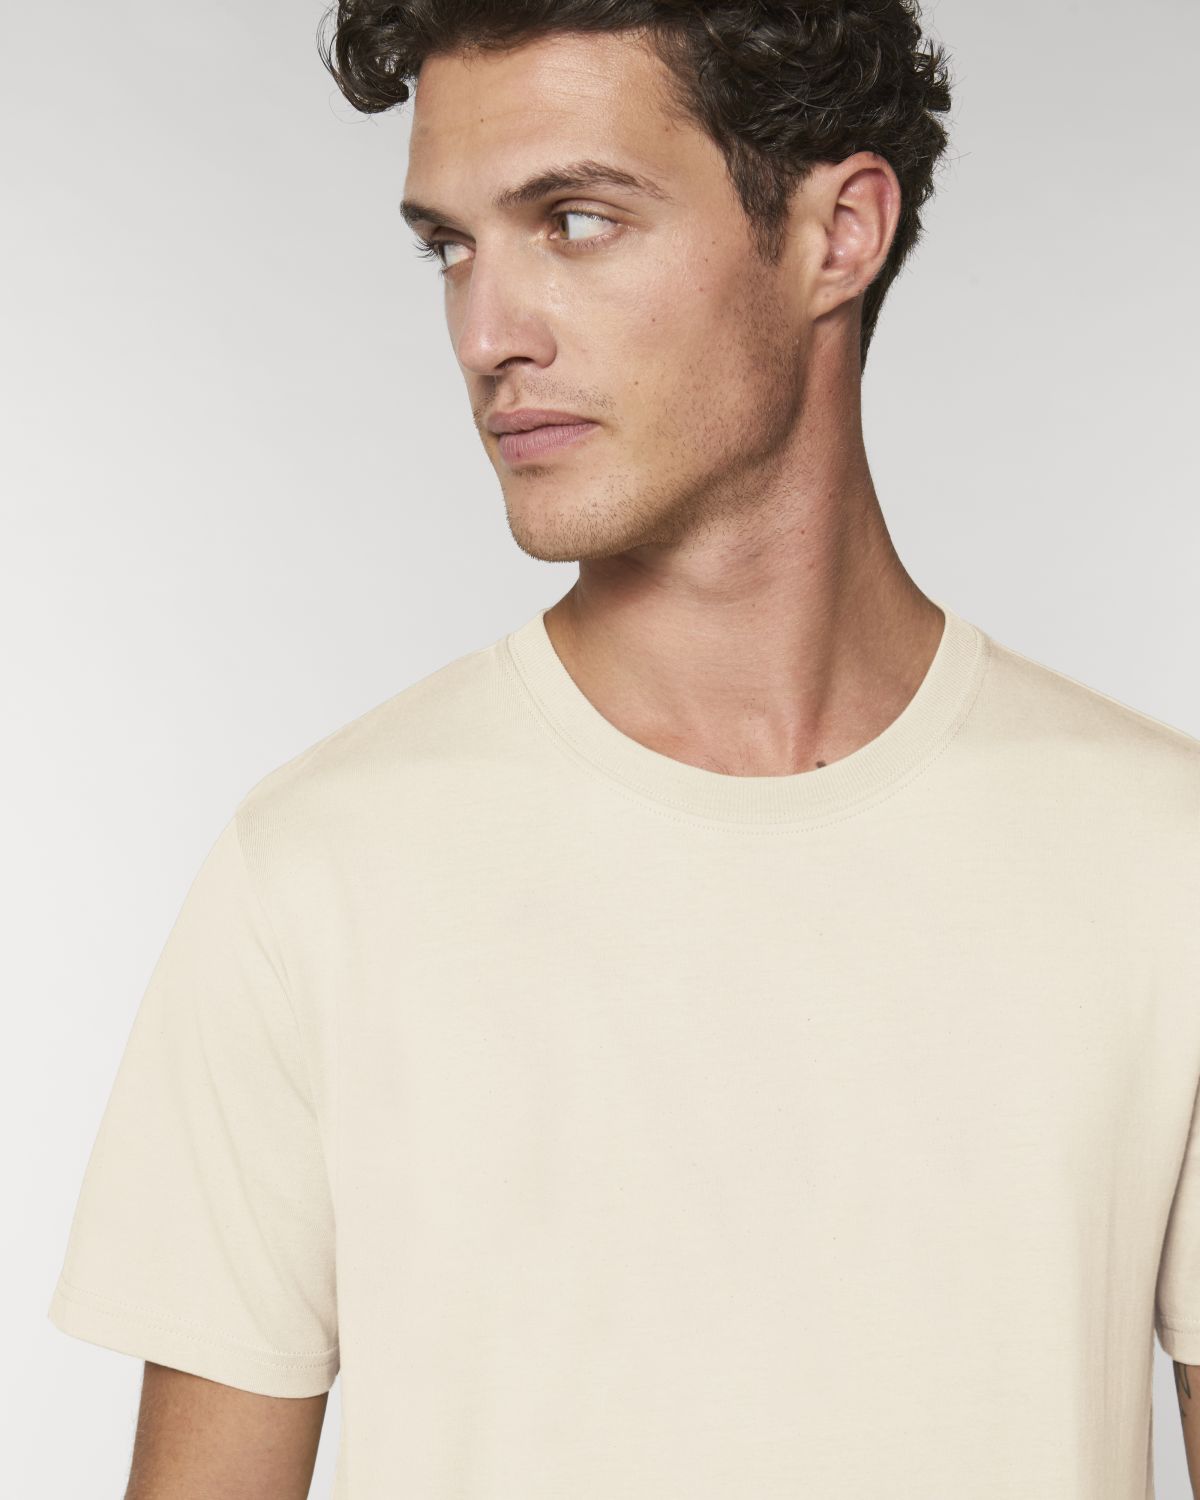 Stanley/Stella's - Sparker T-shirt - Natural Raw